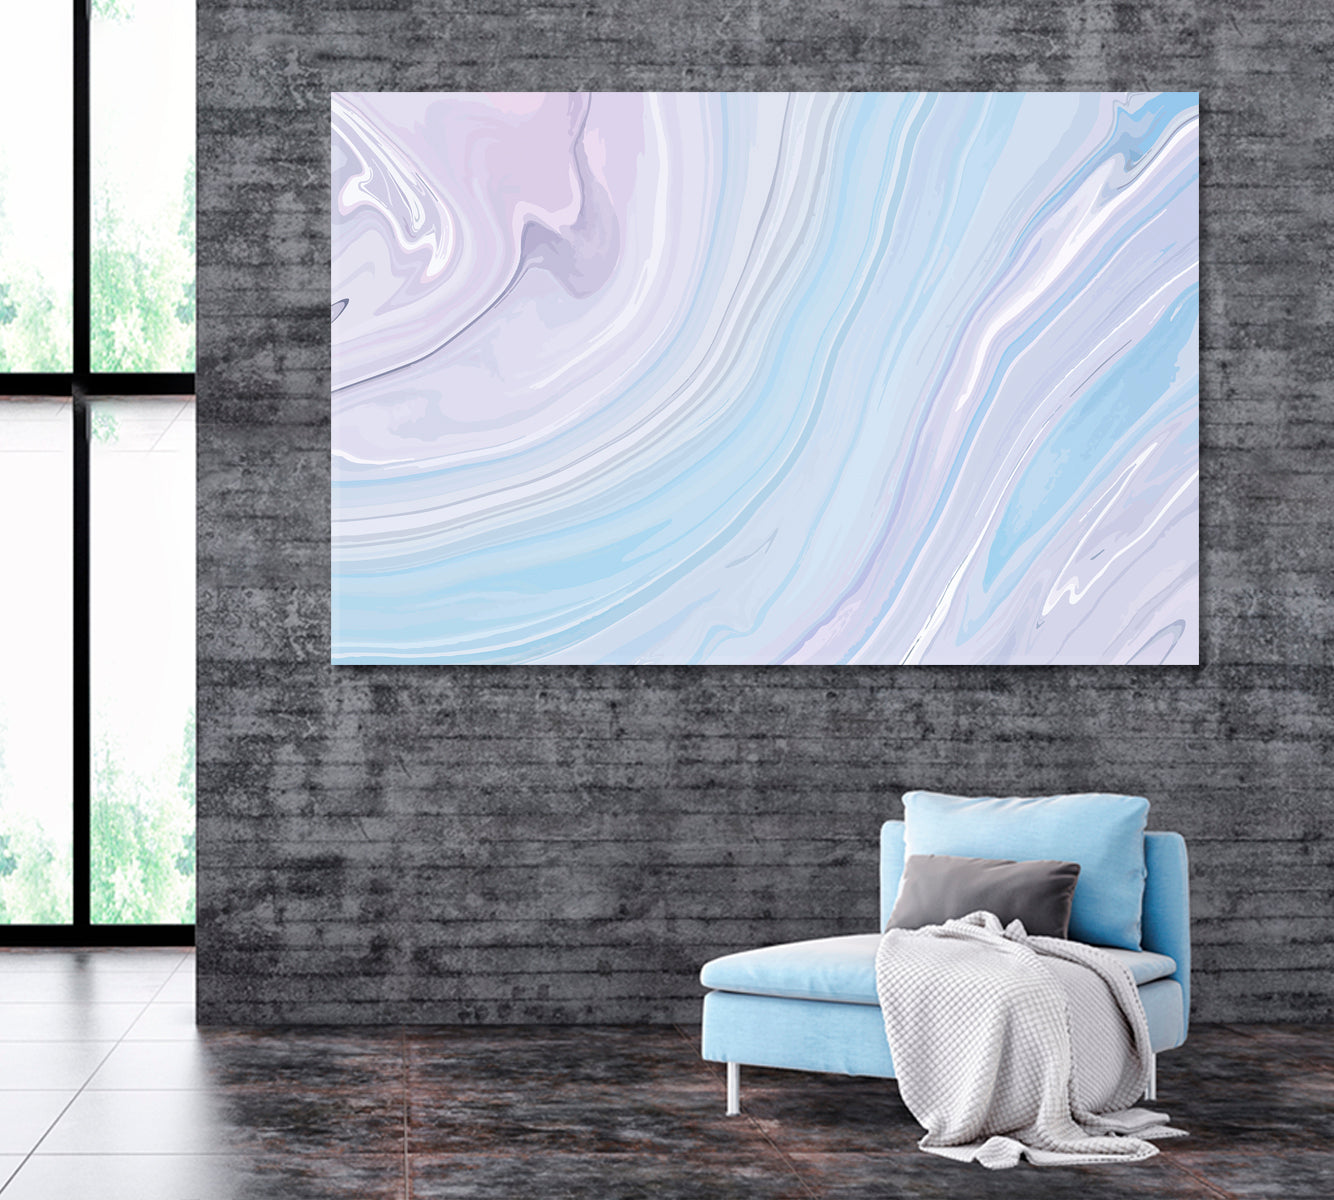 Pastel Blue and Pink Waves and Swirls Canvas Print ArtLexy 1 Panel 24"x16" inches 